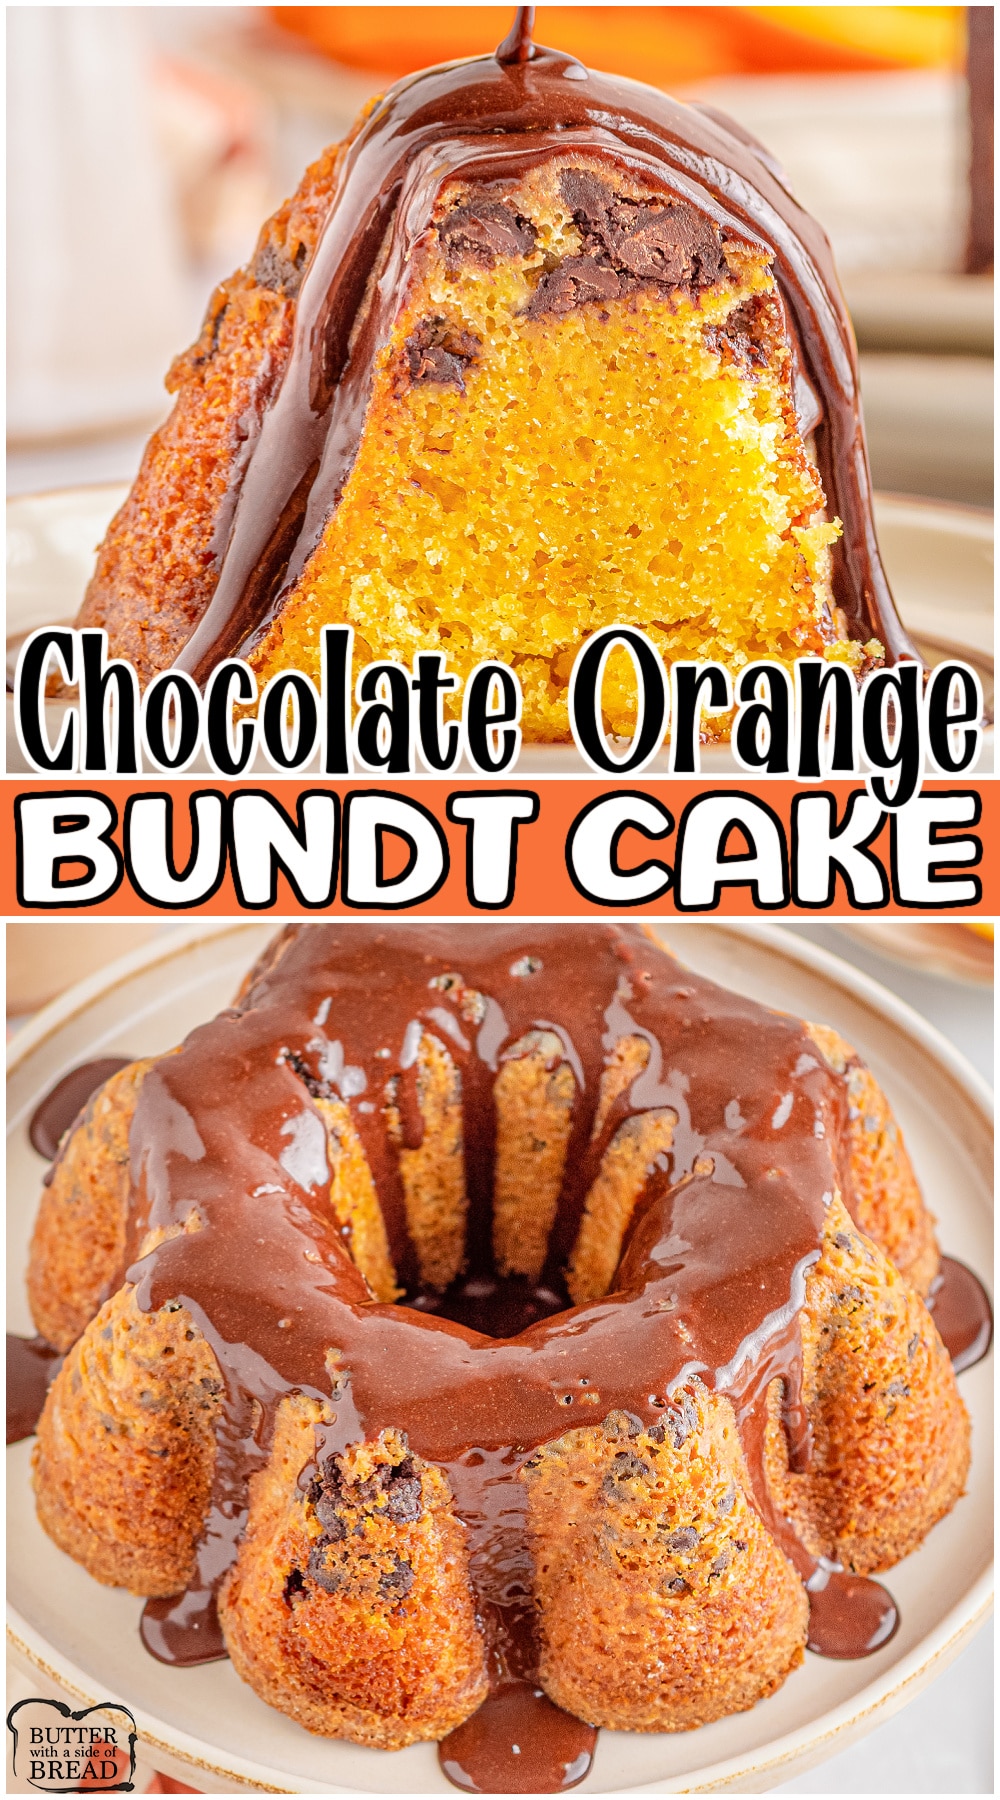 Chocolate Orange Bundt Cake is a delicious bundt cake made with orange juice & zest, chocolate chips, and topped with a chocolate glaze. Perfect cake for chocolate + orange lovers!